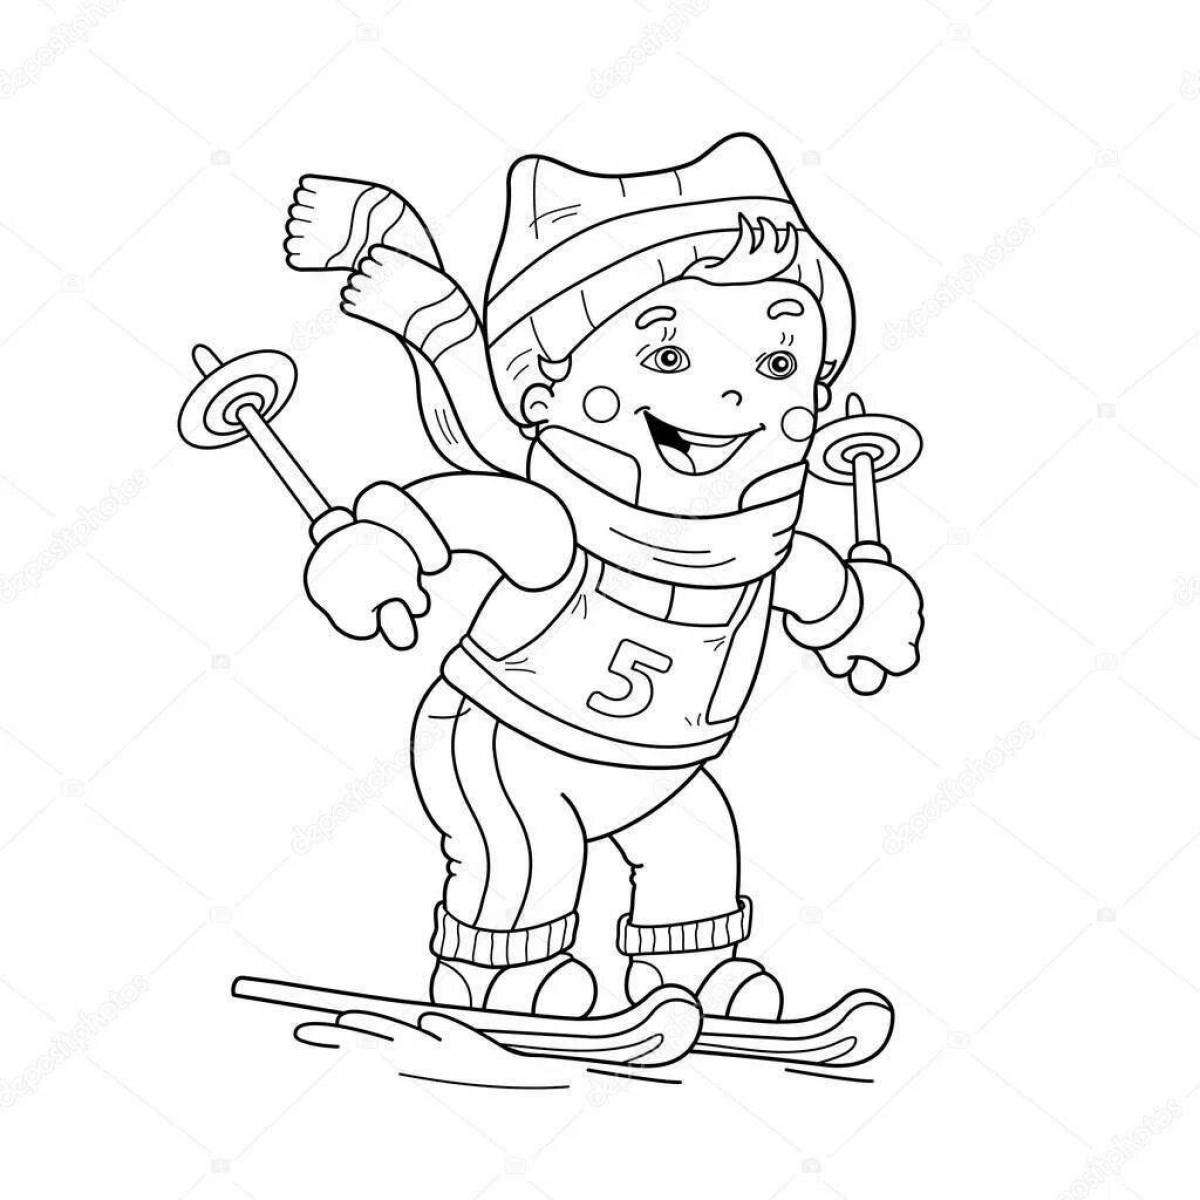 Fantastic winter sports coloring book for 4-5 year olds